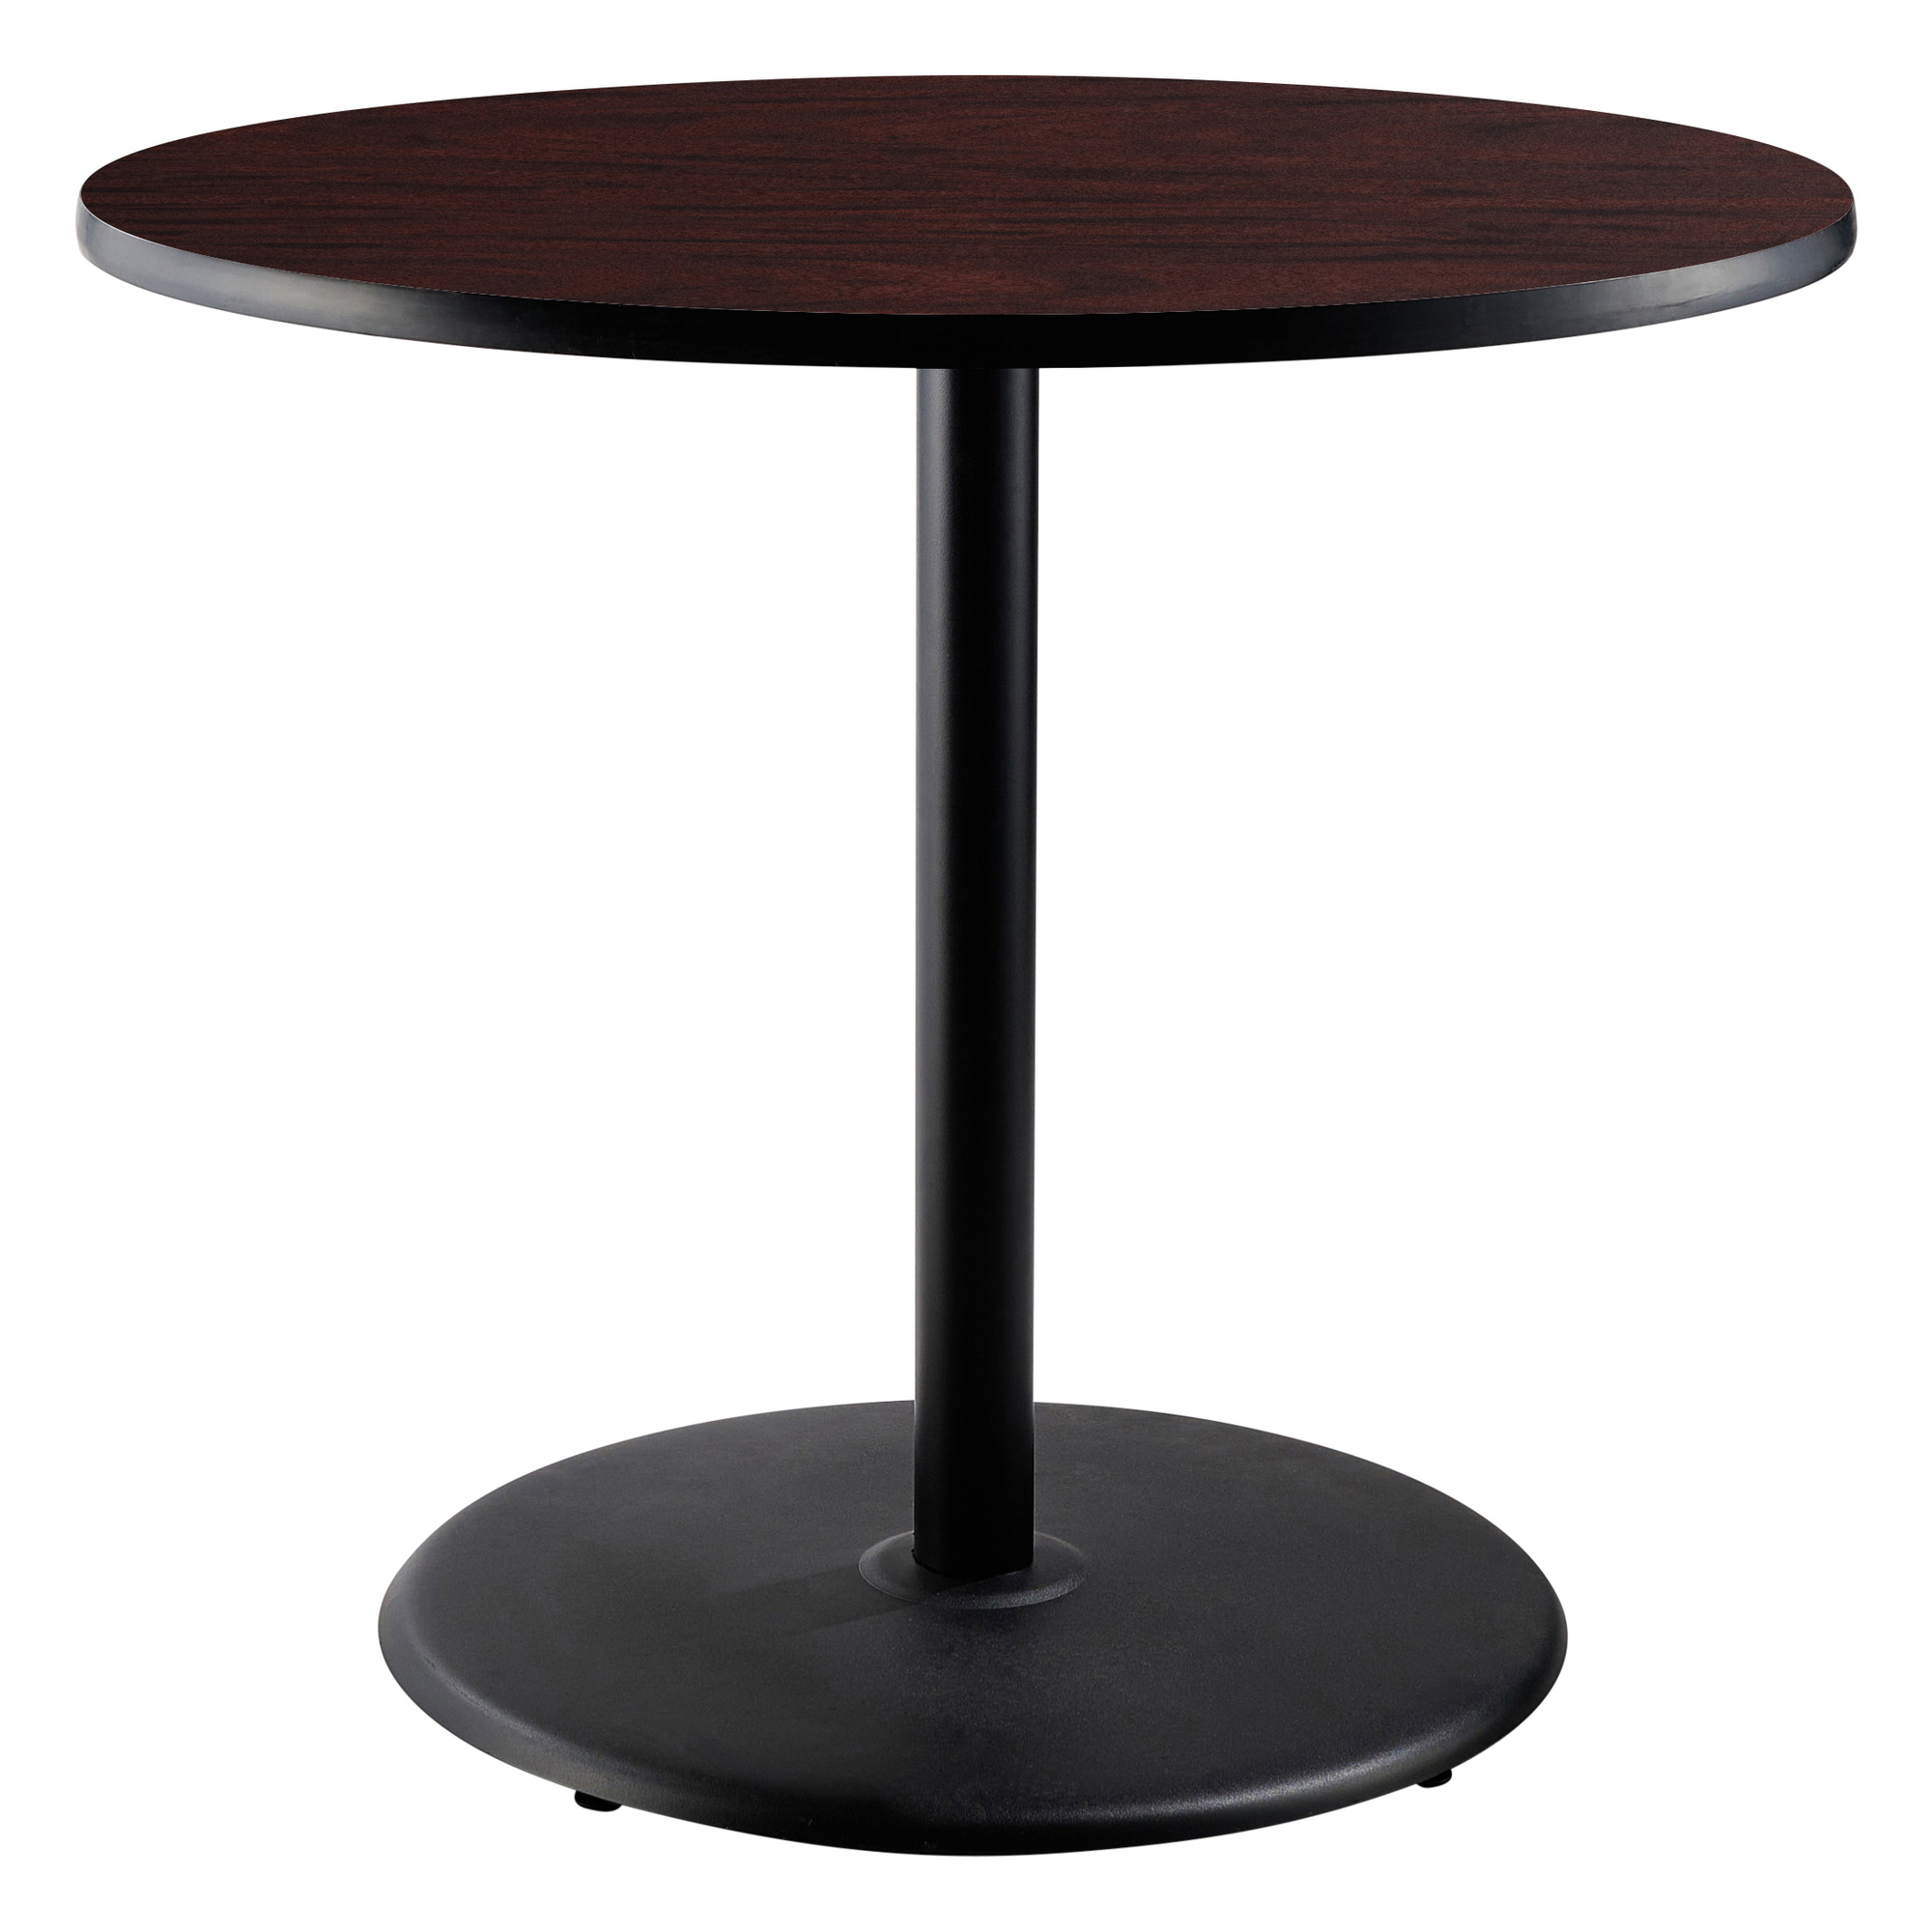 "National Public Seating, Cafe Table, 36x36x36 Round ""R"" Base, Height 36 in, Model CT13636RCPBTMMY"